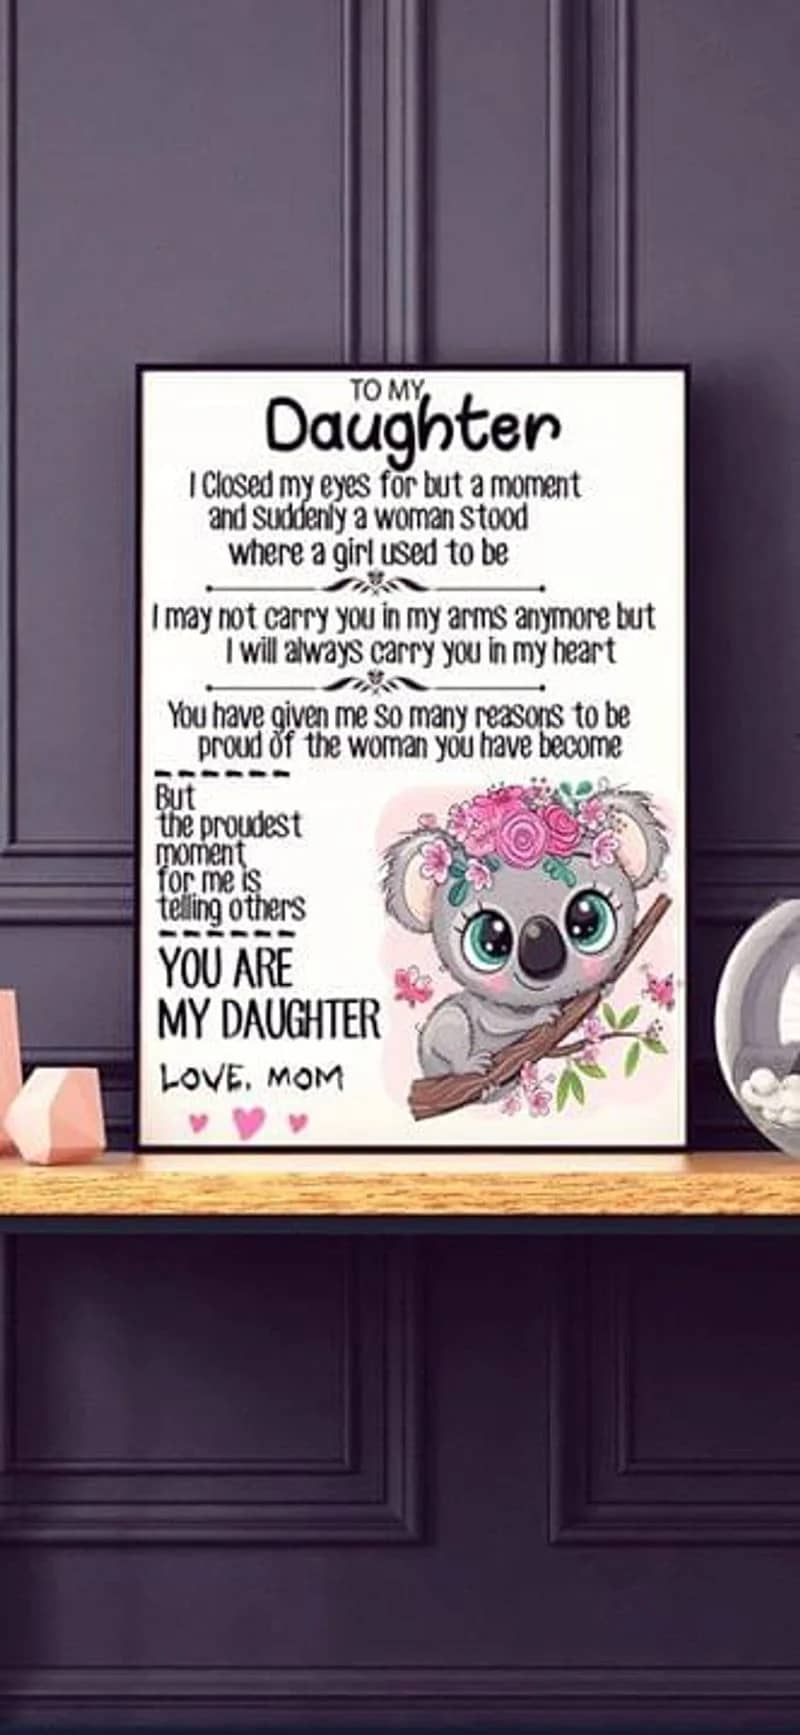 To My Daughter From Mom, I Closed My Eyes For But A Moment Unframed , Wrapped Canvas Wall Decor Poster